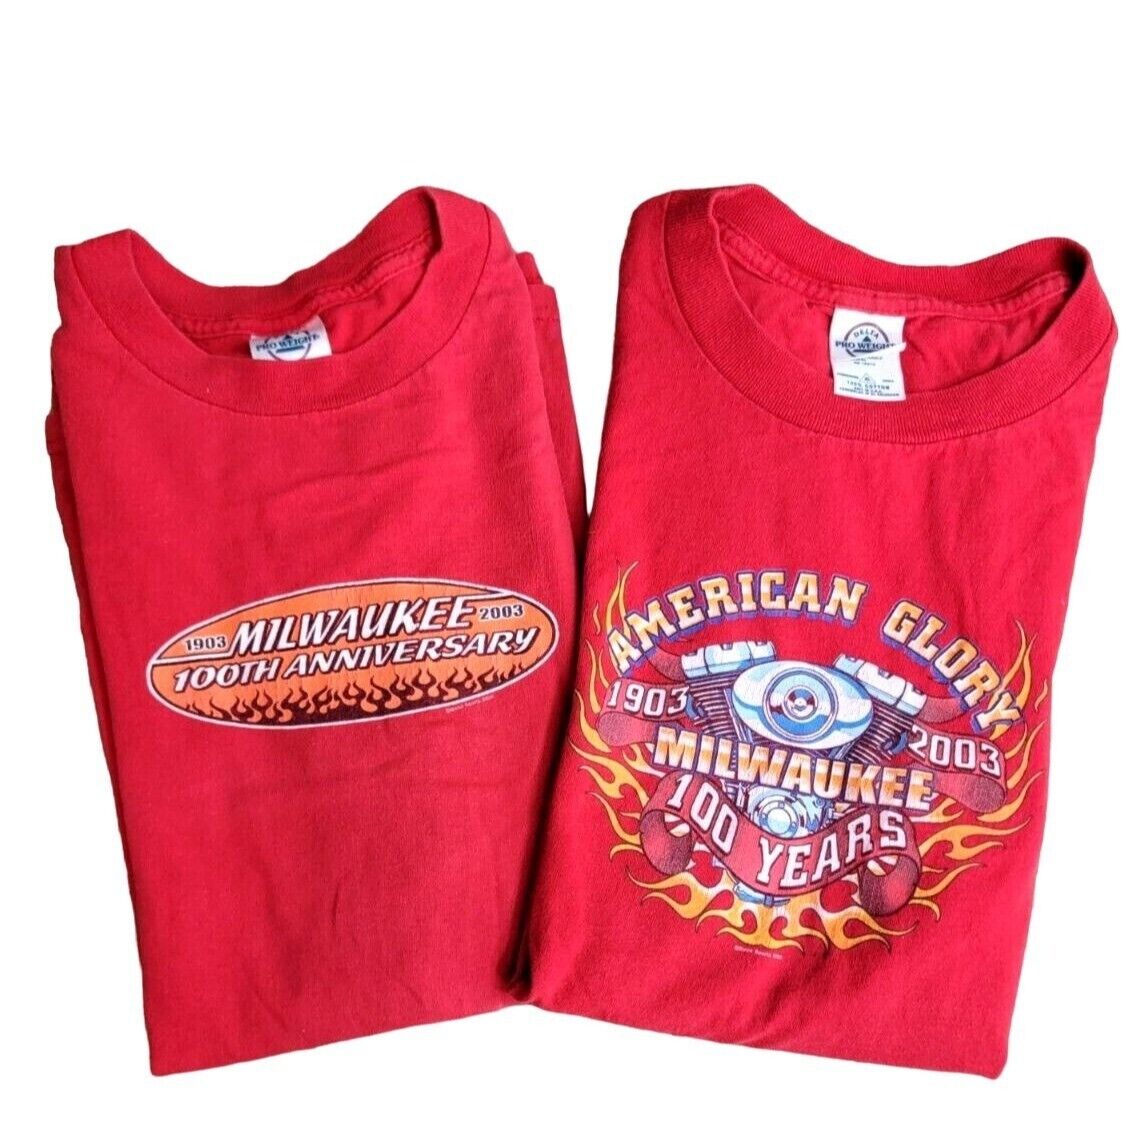 2 Vintage American Glory Motorcycle Ride Of The Century 1903 2003 T-shirts